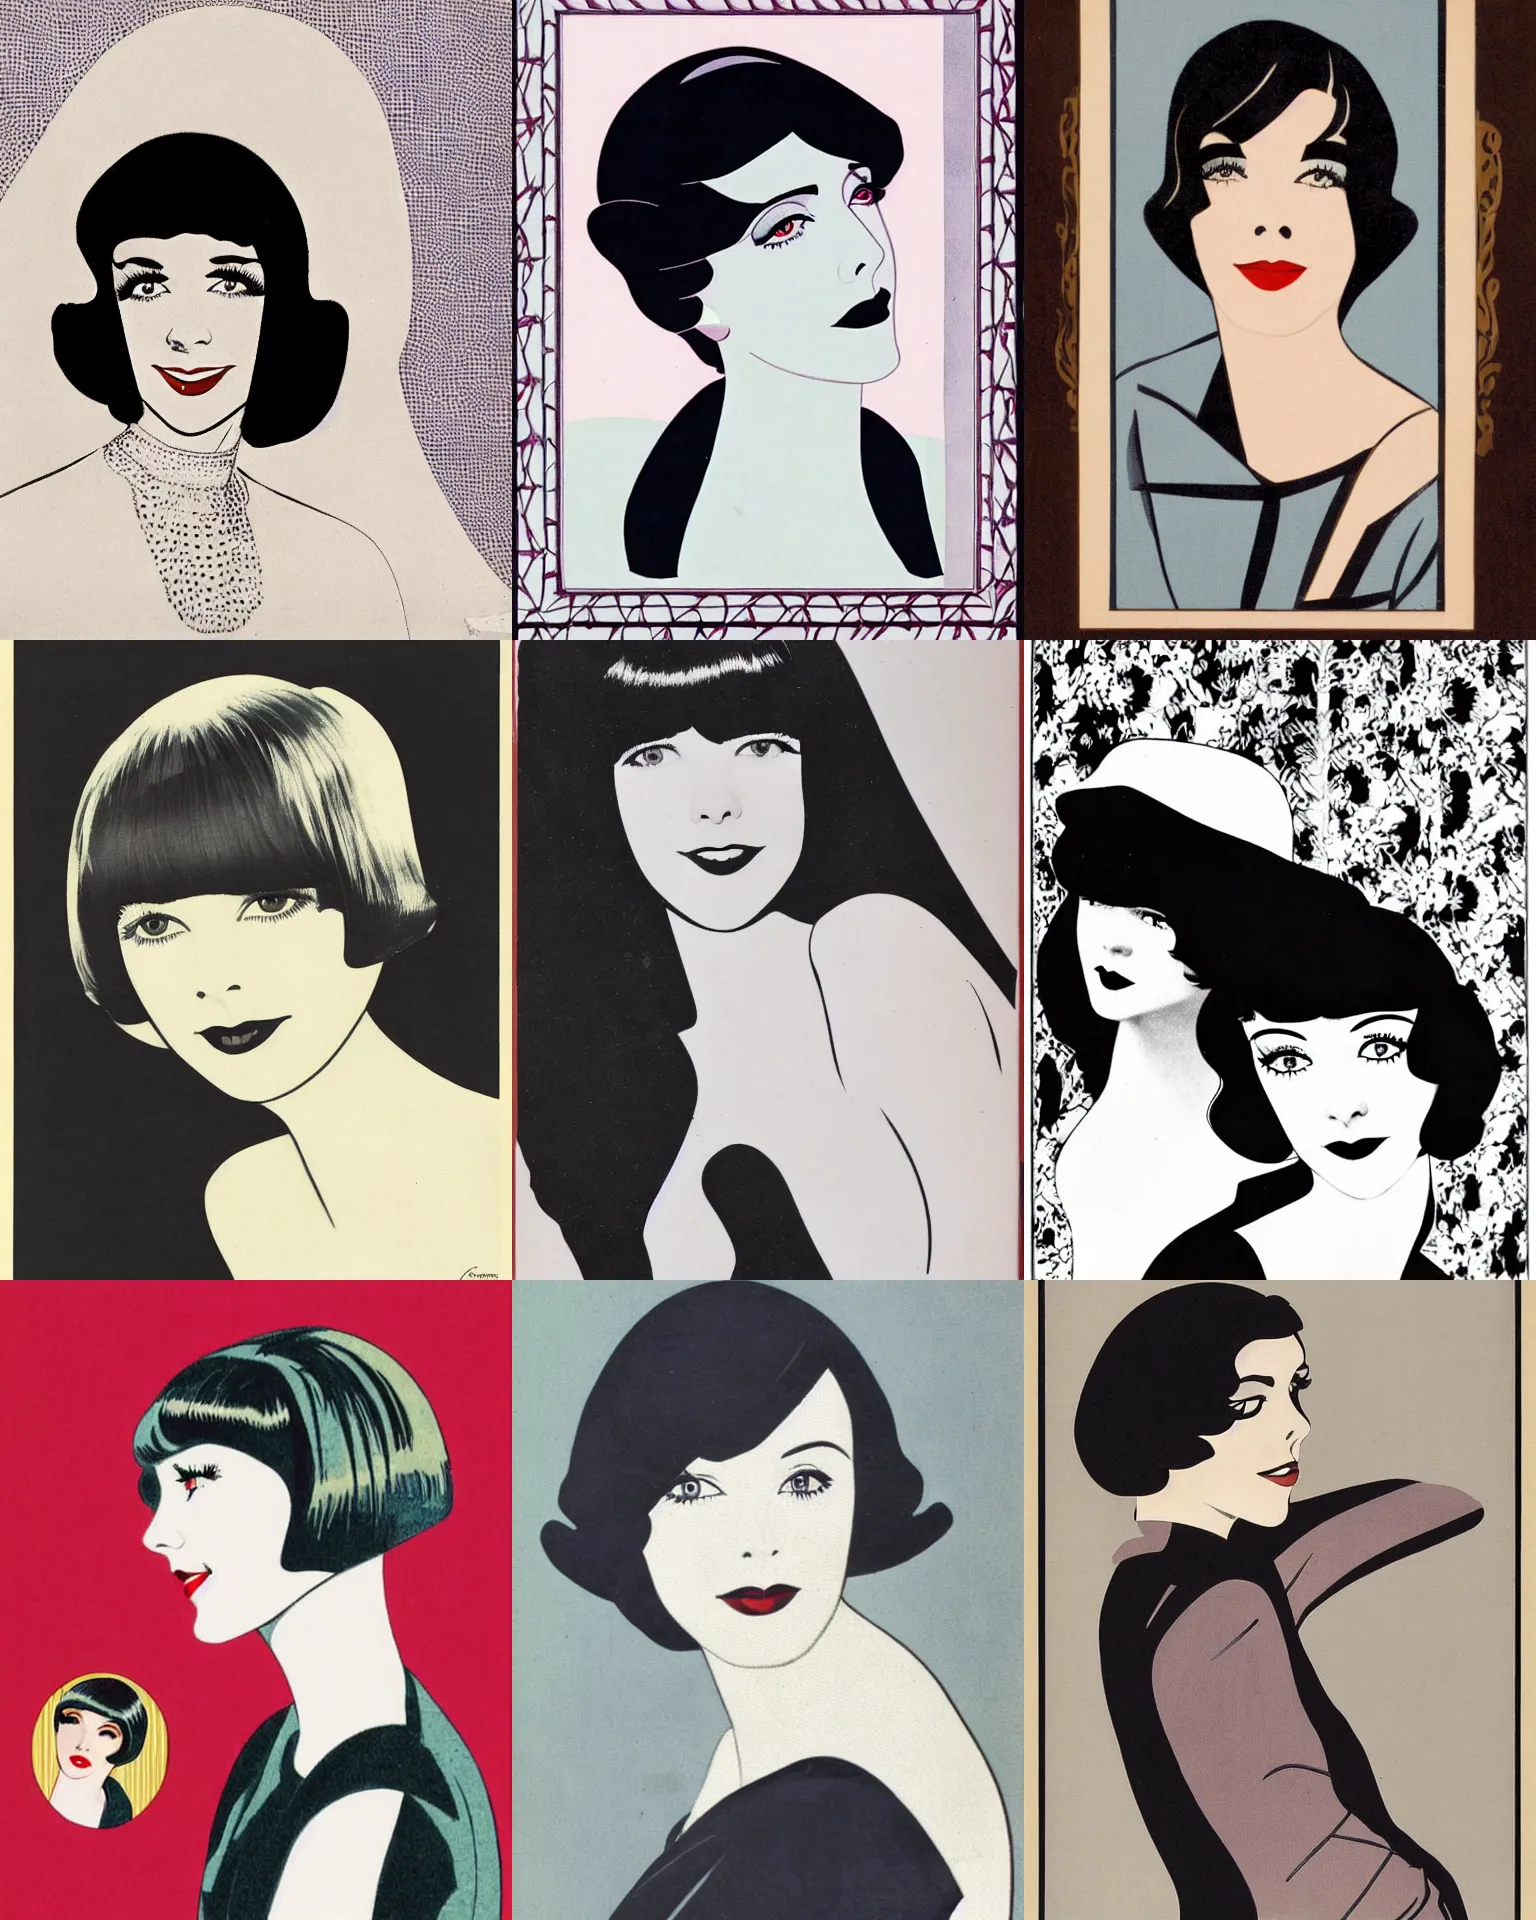 Prompt: Colleen Moore 25 years old, bob haircut, portrait by Patrick Nagel, 1920s, patterned